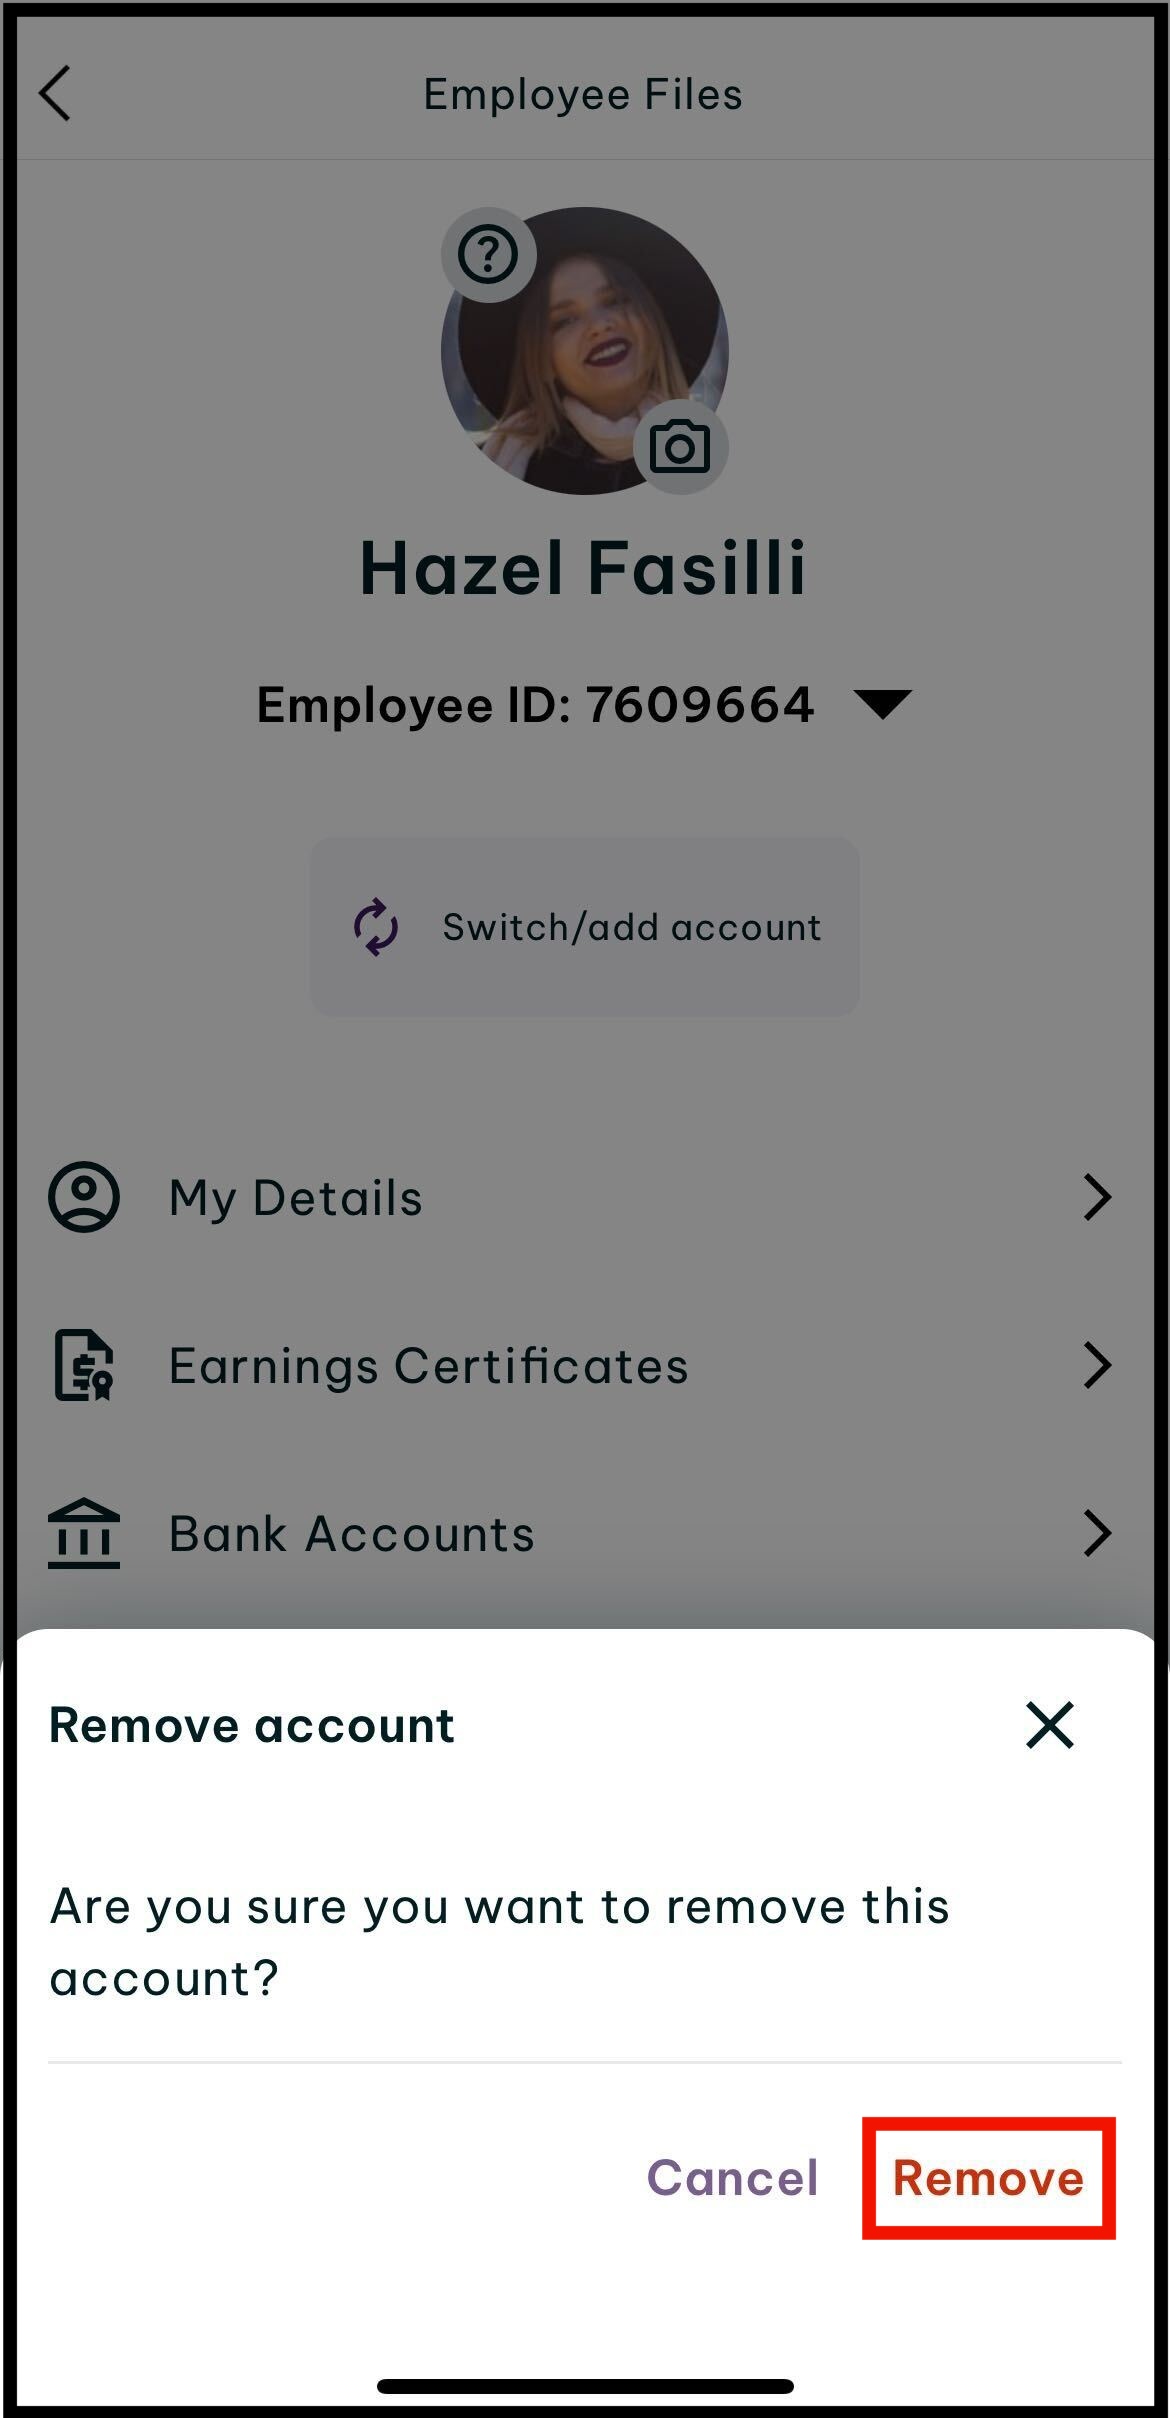 Screenshot of where to tap on remove to remove the account